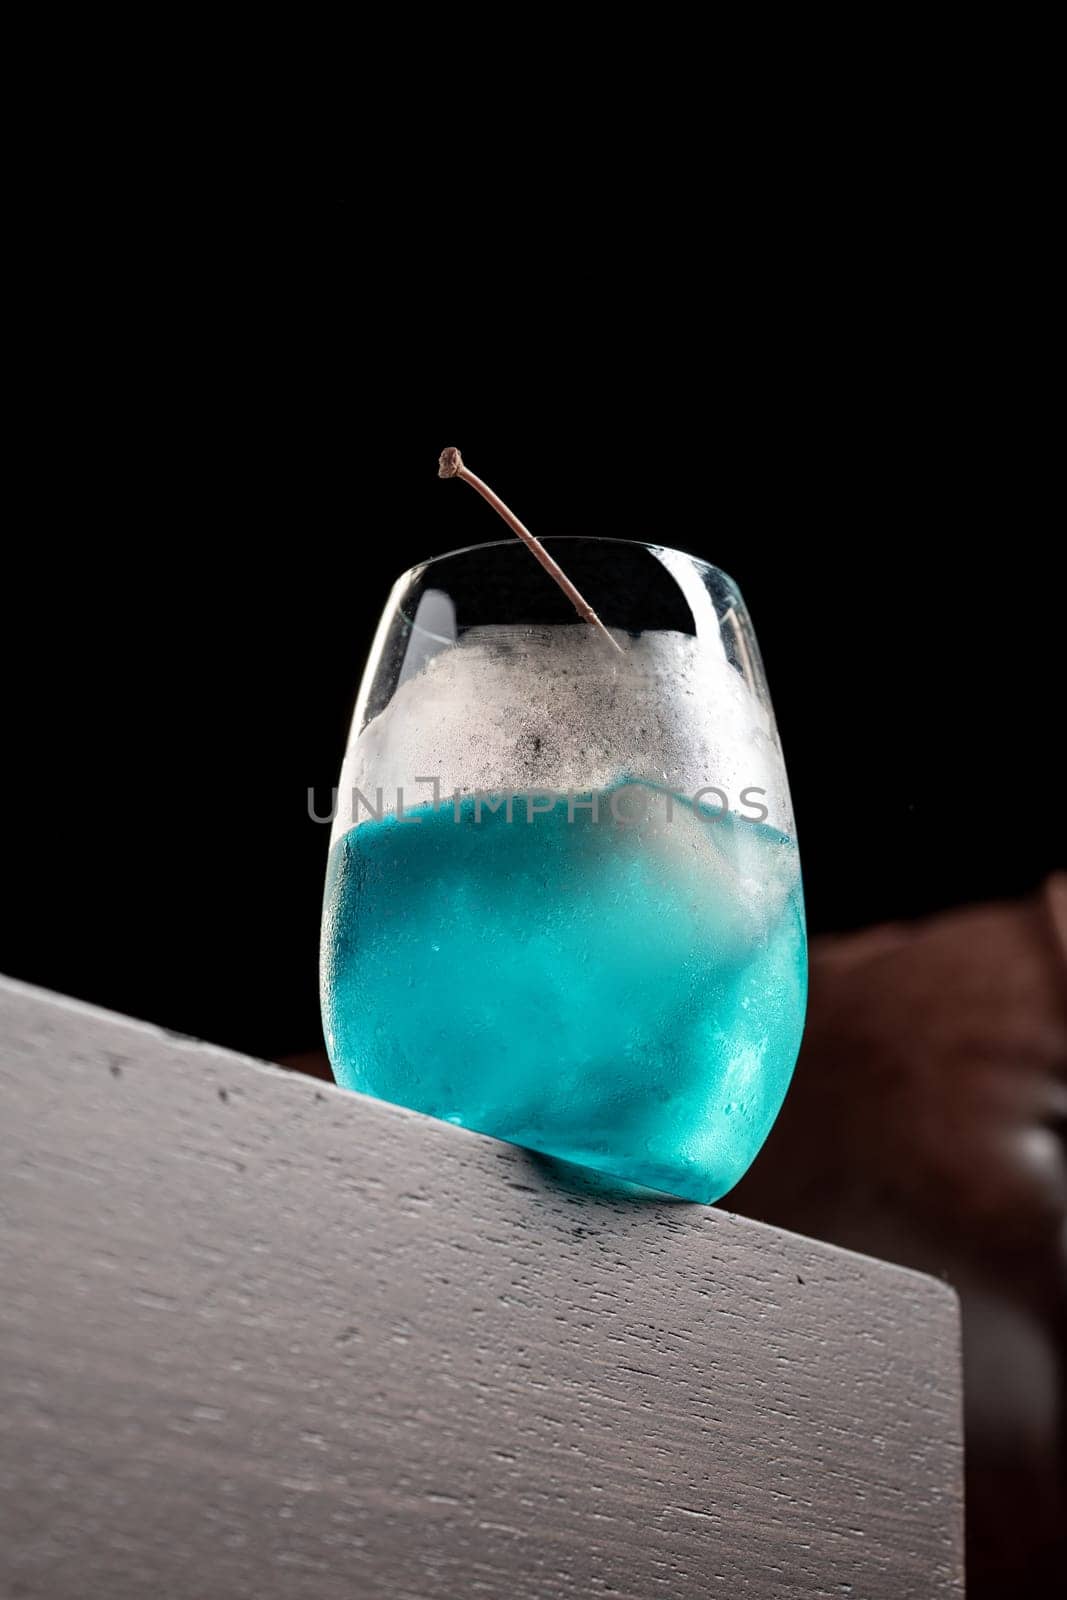 Luxury cocktail on the wooden table on a dark background